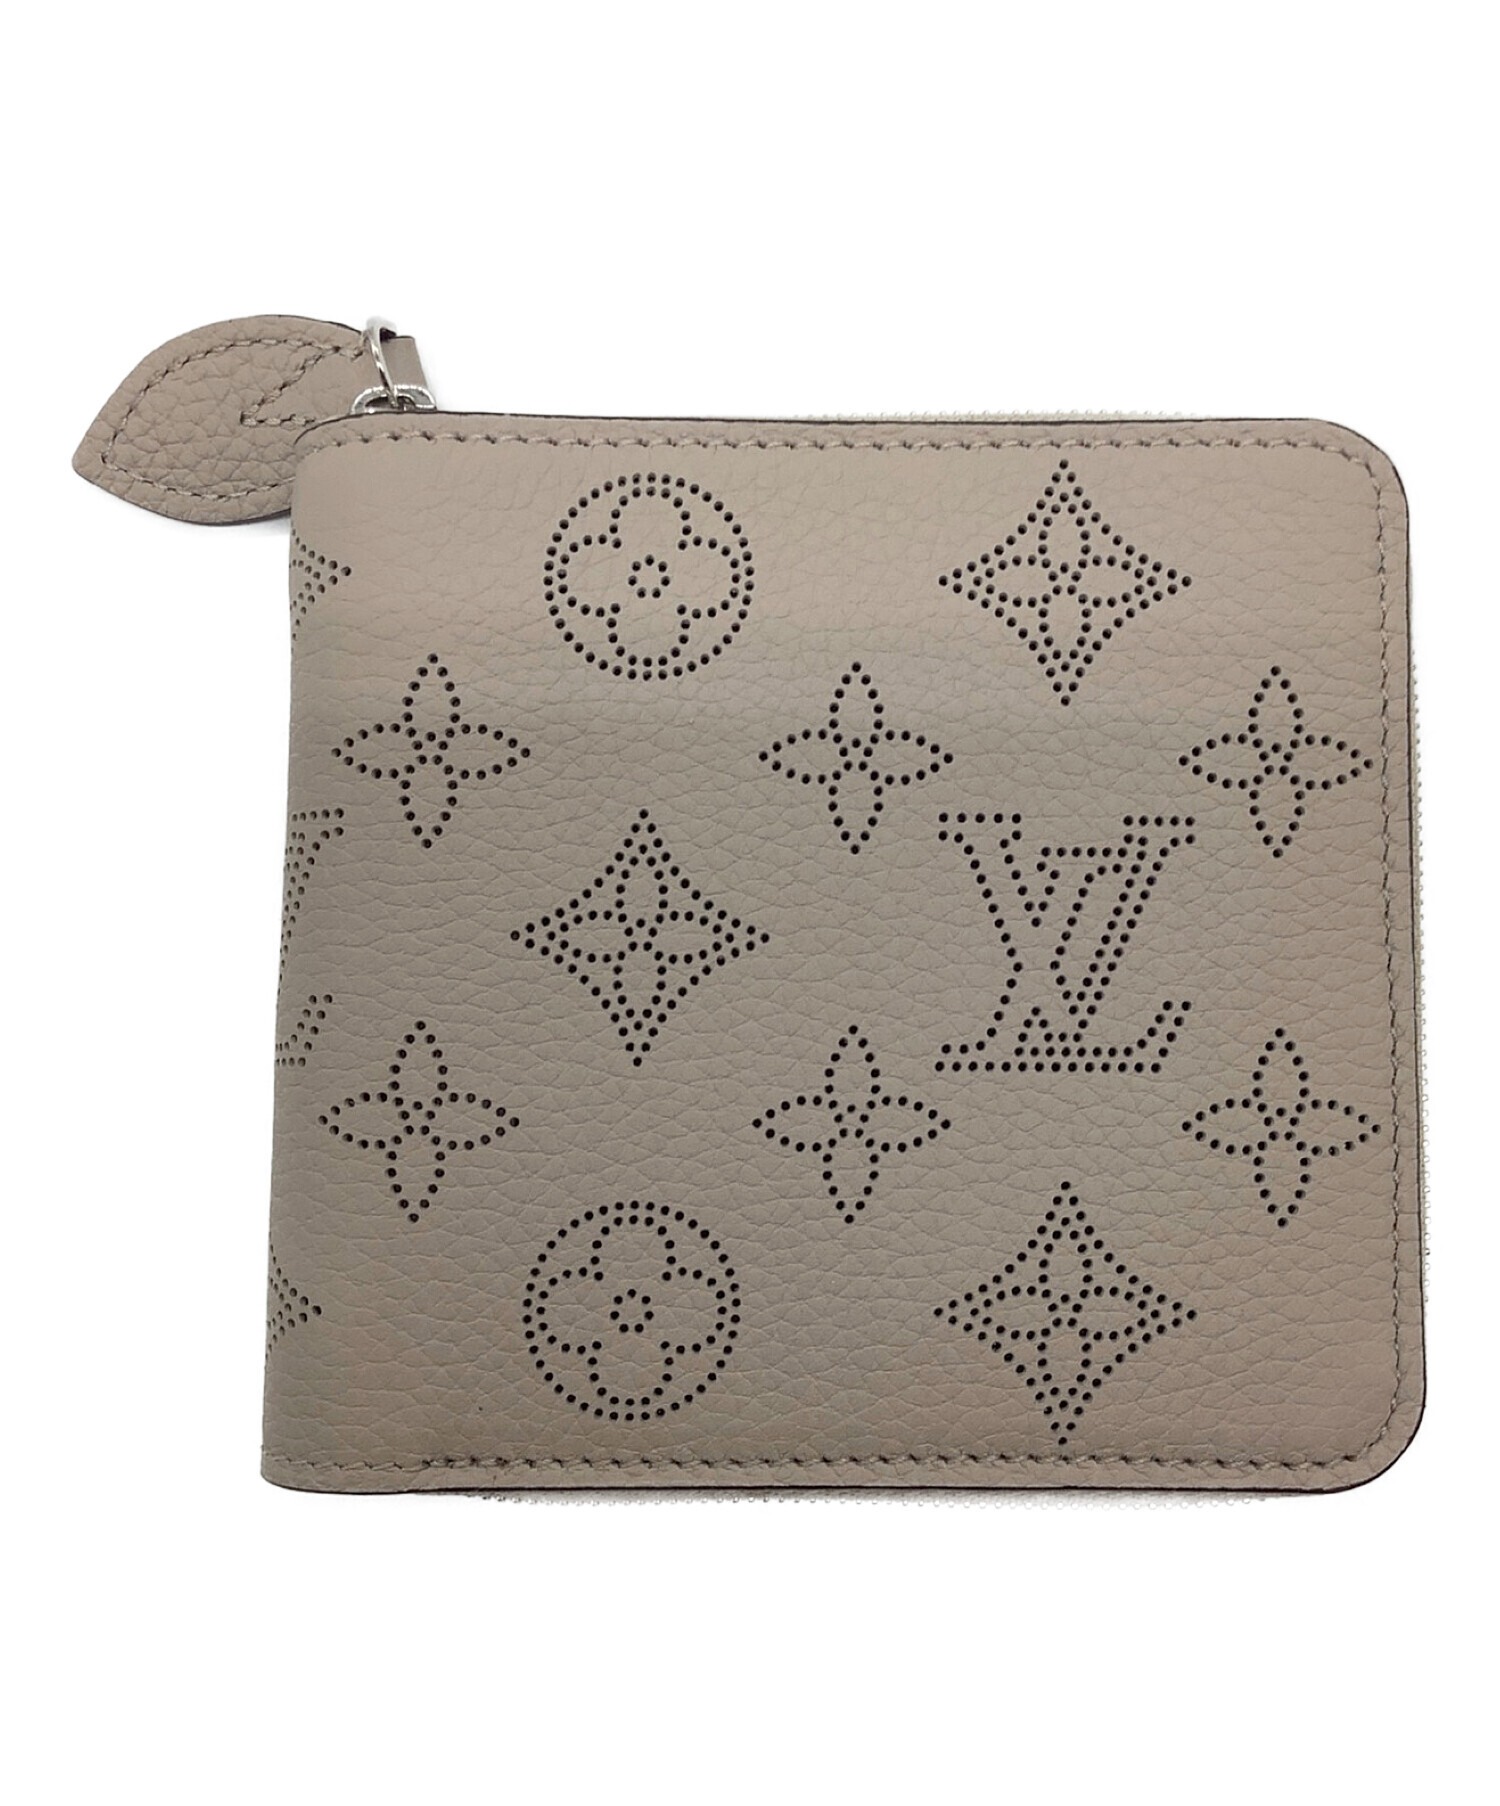 LOUIS VUITTON (ルイ ヴィトン) ジッピーコンパクトウォレット グレー